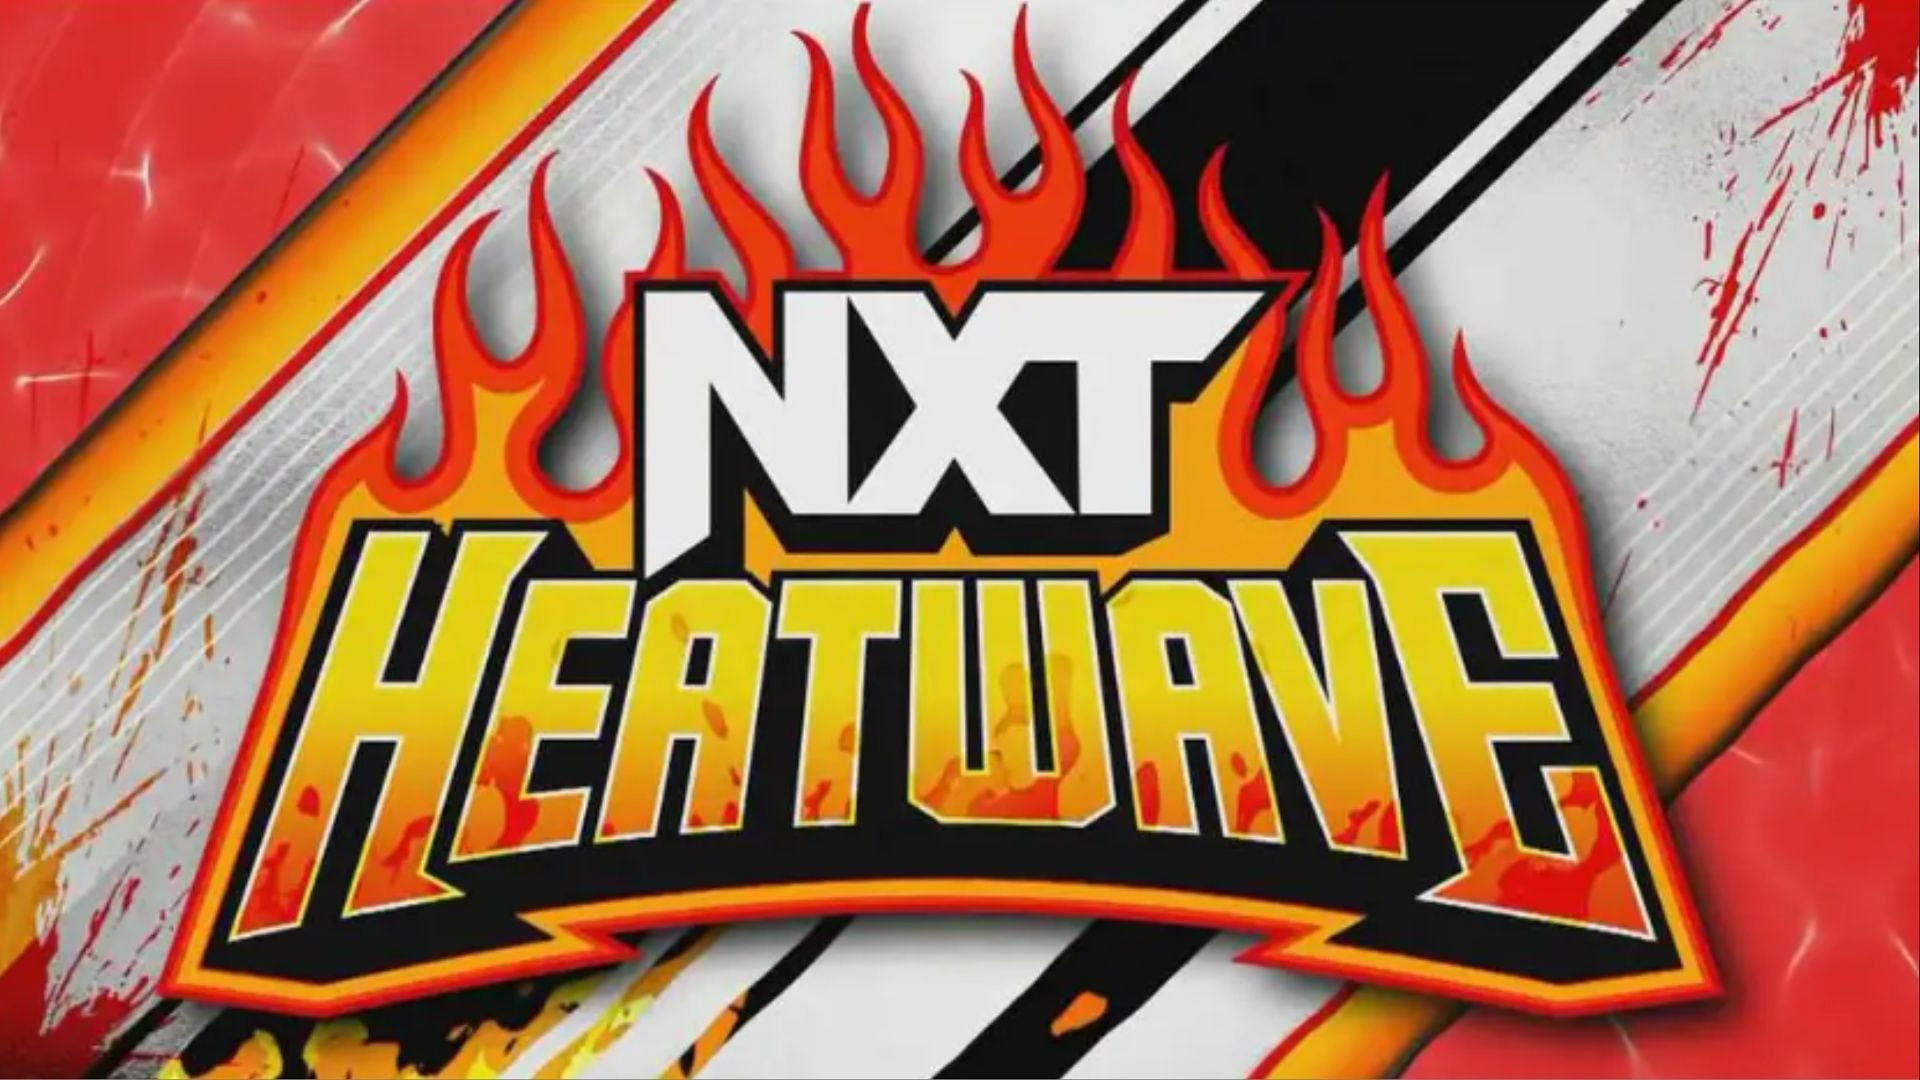 29yearold star injured at NXT Heatwave? What you might have missed